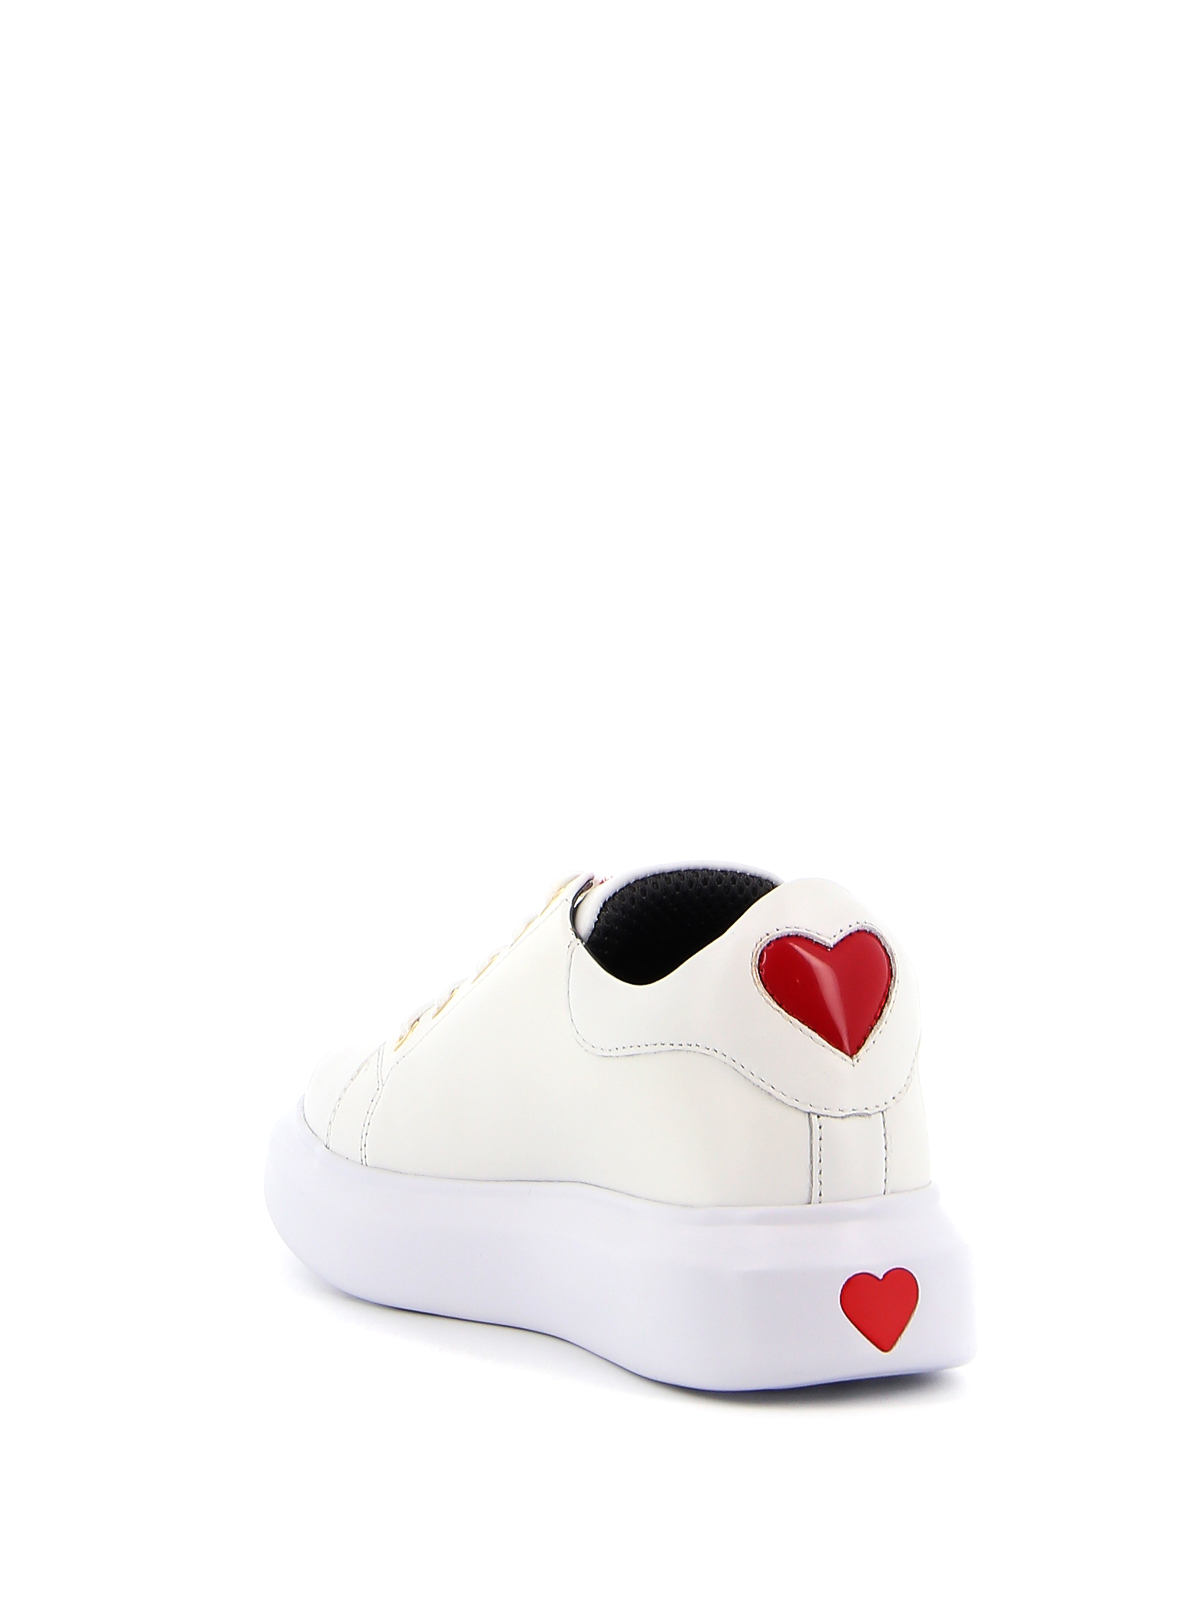 Stoffig Sprong grillen Trainers Love Moschino - Contrasting heart detailed leather sneakers -  JA15494G0BJA0100